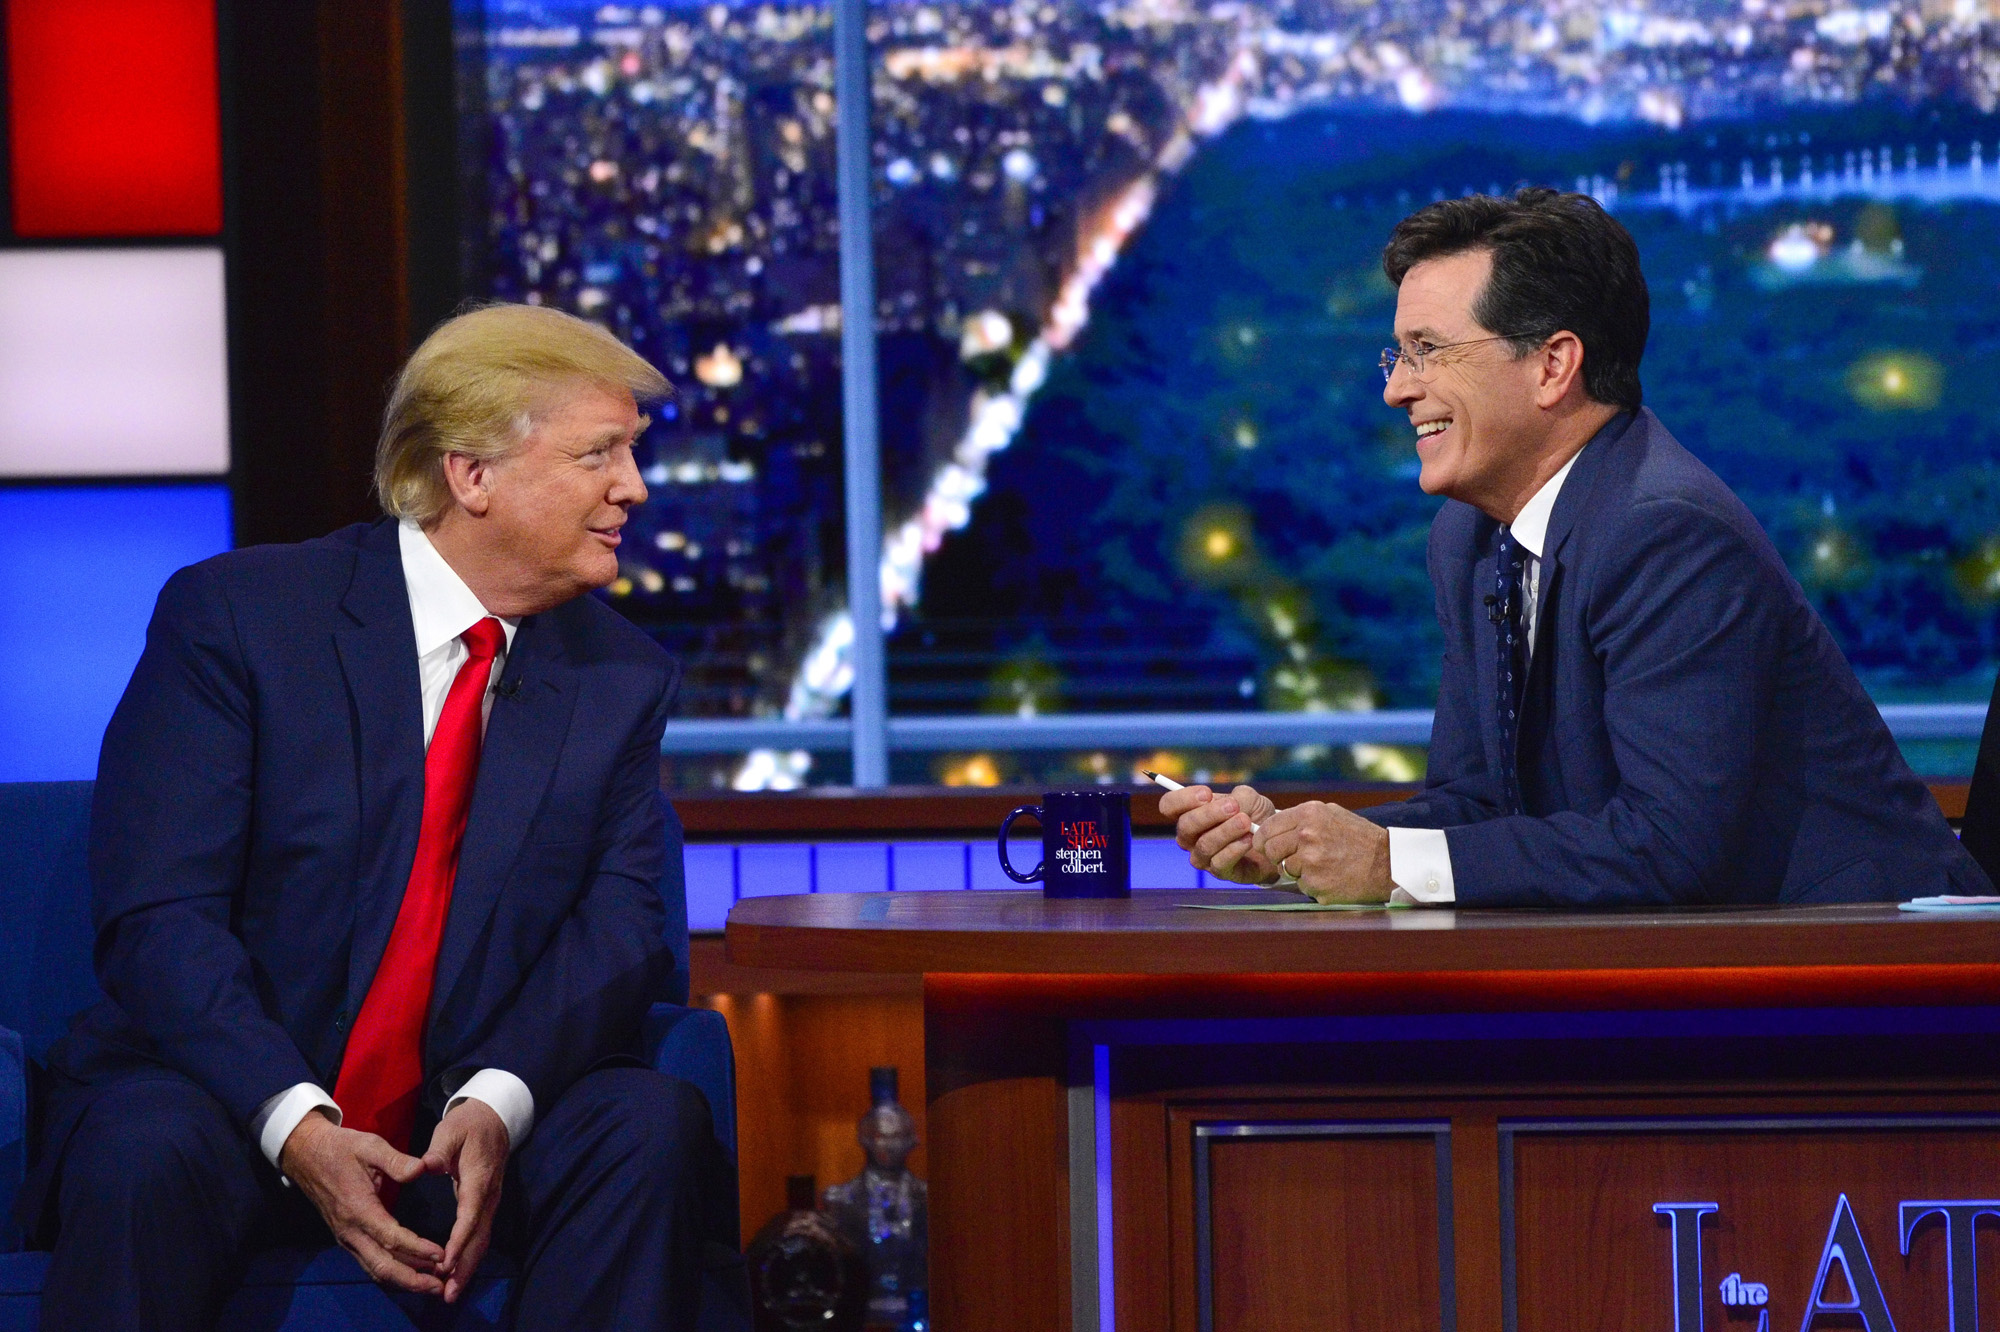 Donald Trump talks about his US Presidential campaign on The Late Show with Stephen Colbert, Tuesday Sept. 22, 2015 on the CBS Television Network.